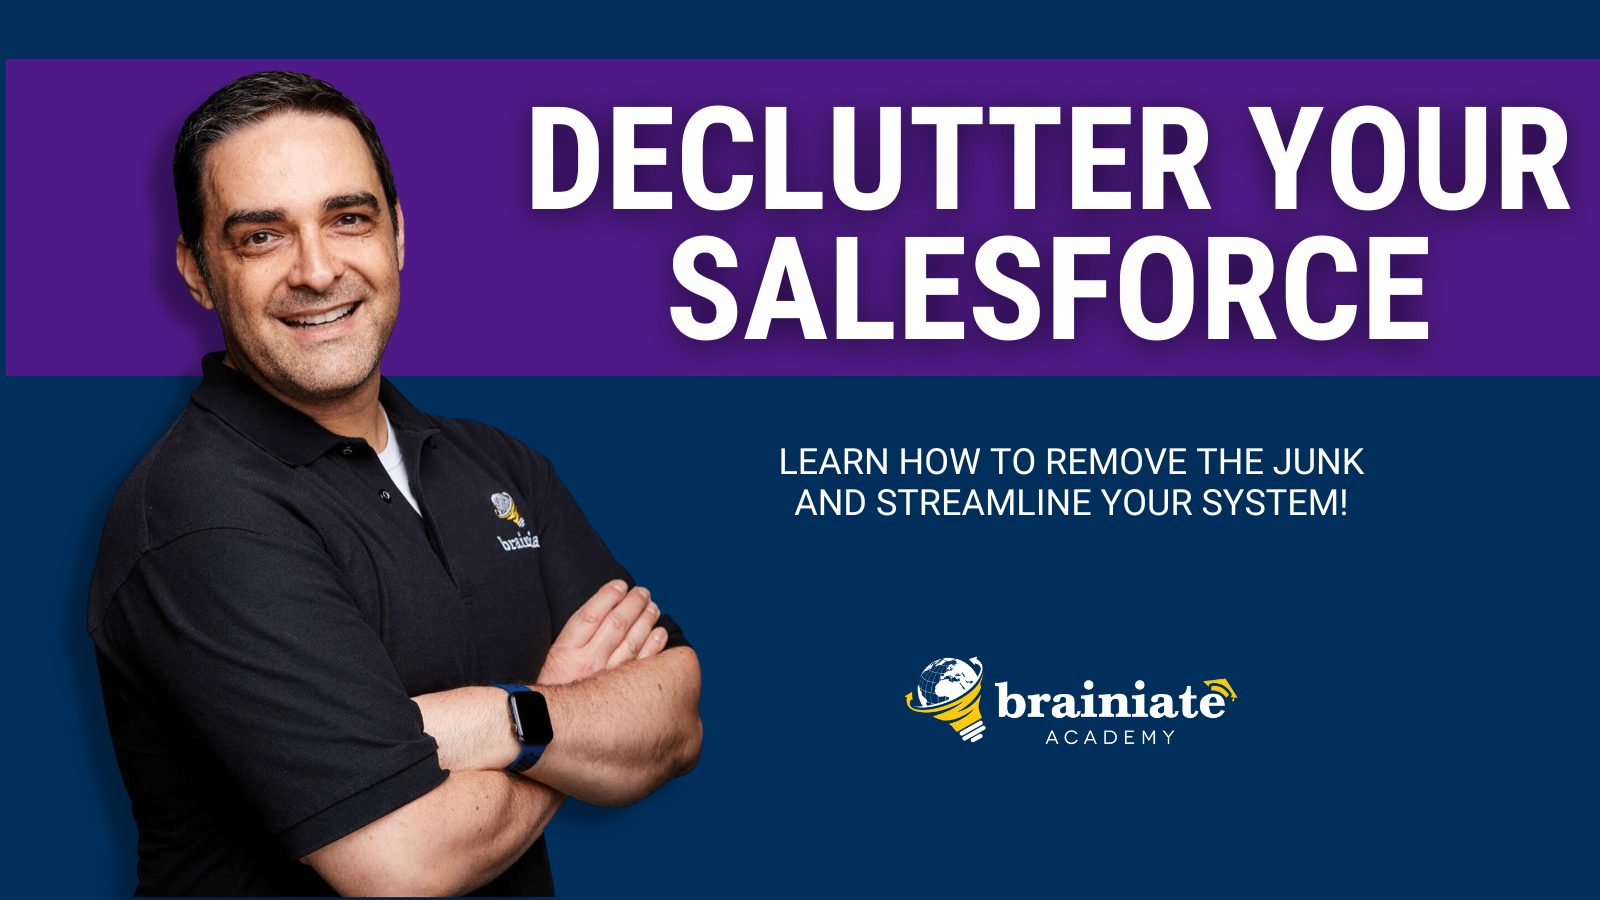 Learn how to identify and remove the technical debt from your current Salesforce configuration